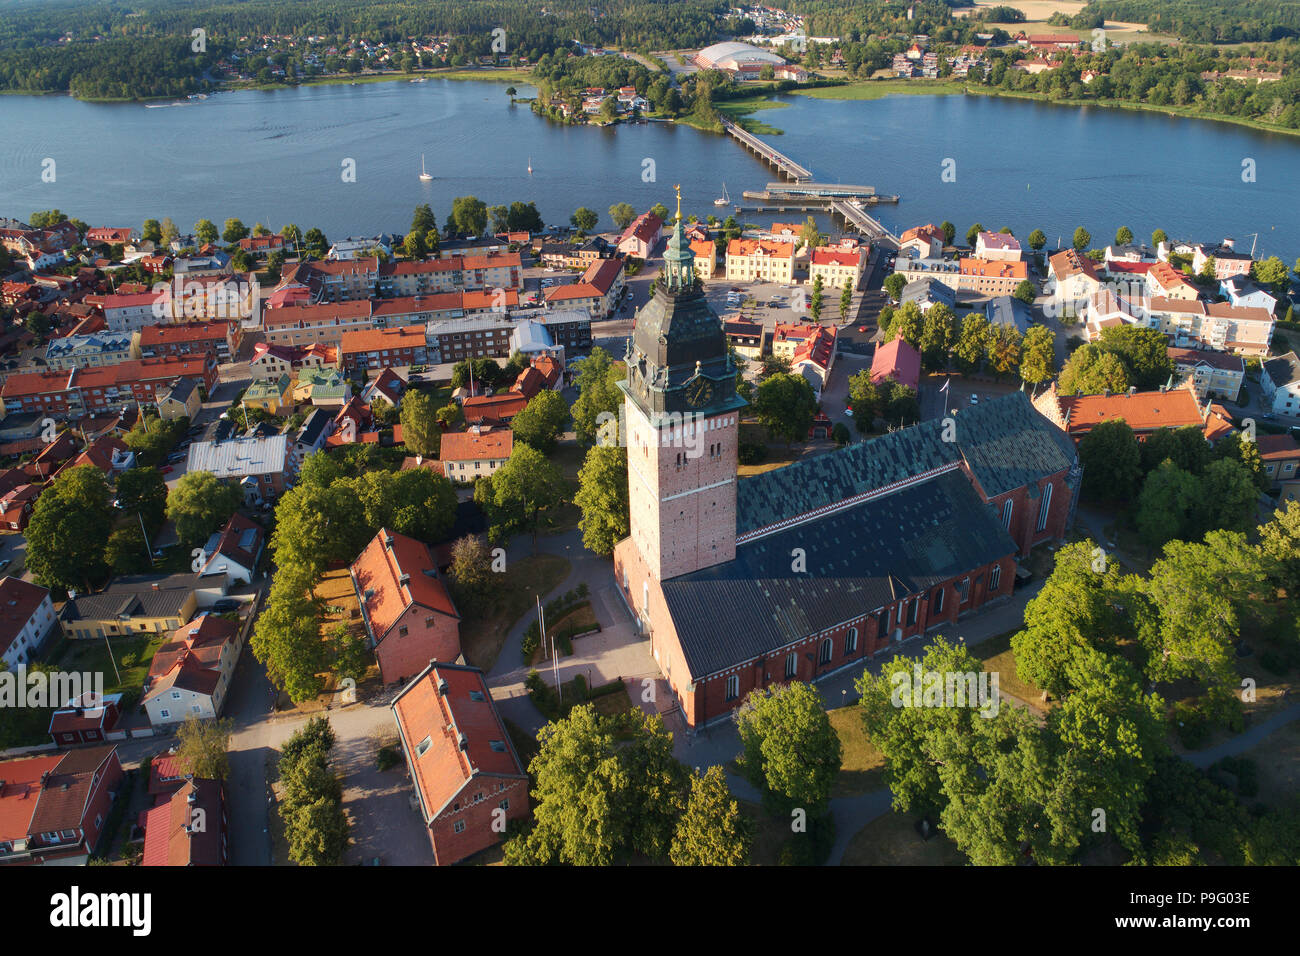 Strangnas, Sweden - July 16, 2018: Aerial view of the scandinavian brick gothic Strangnas cathedral surronded by the town. Stock Photo